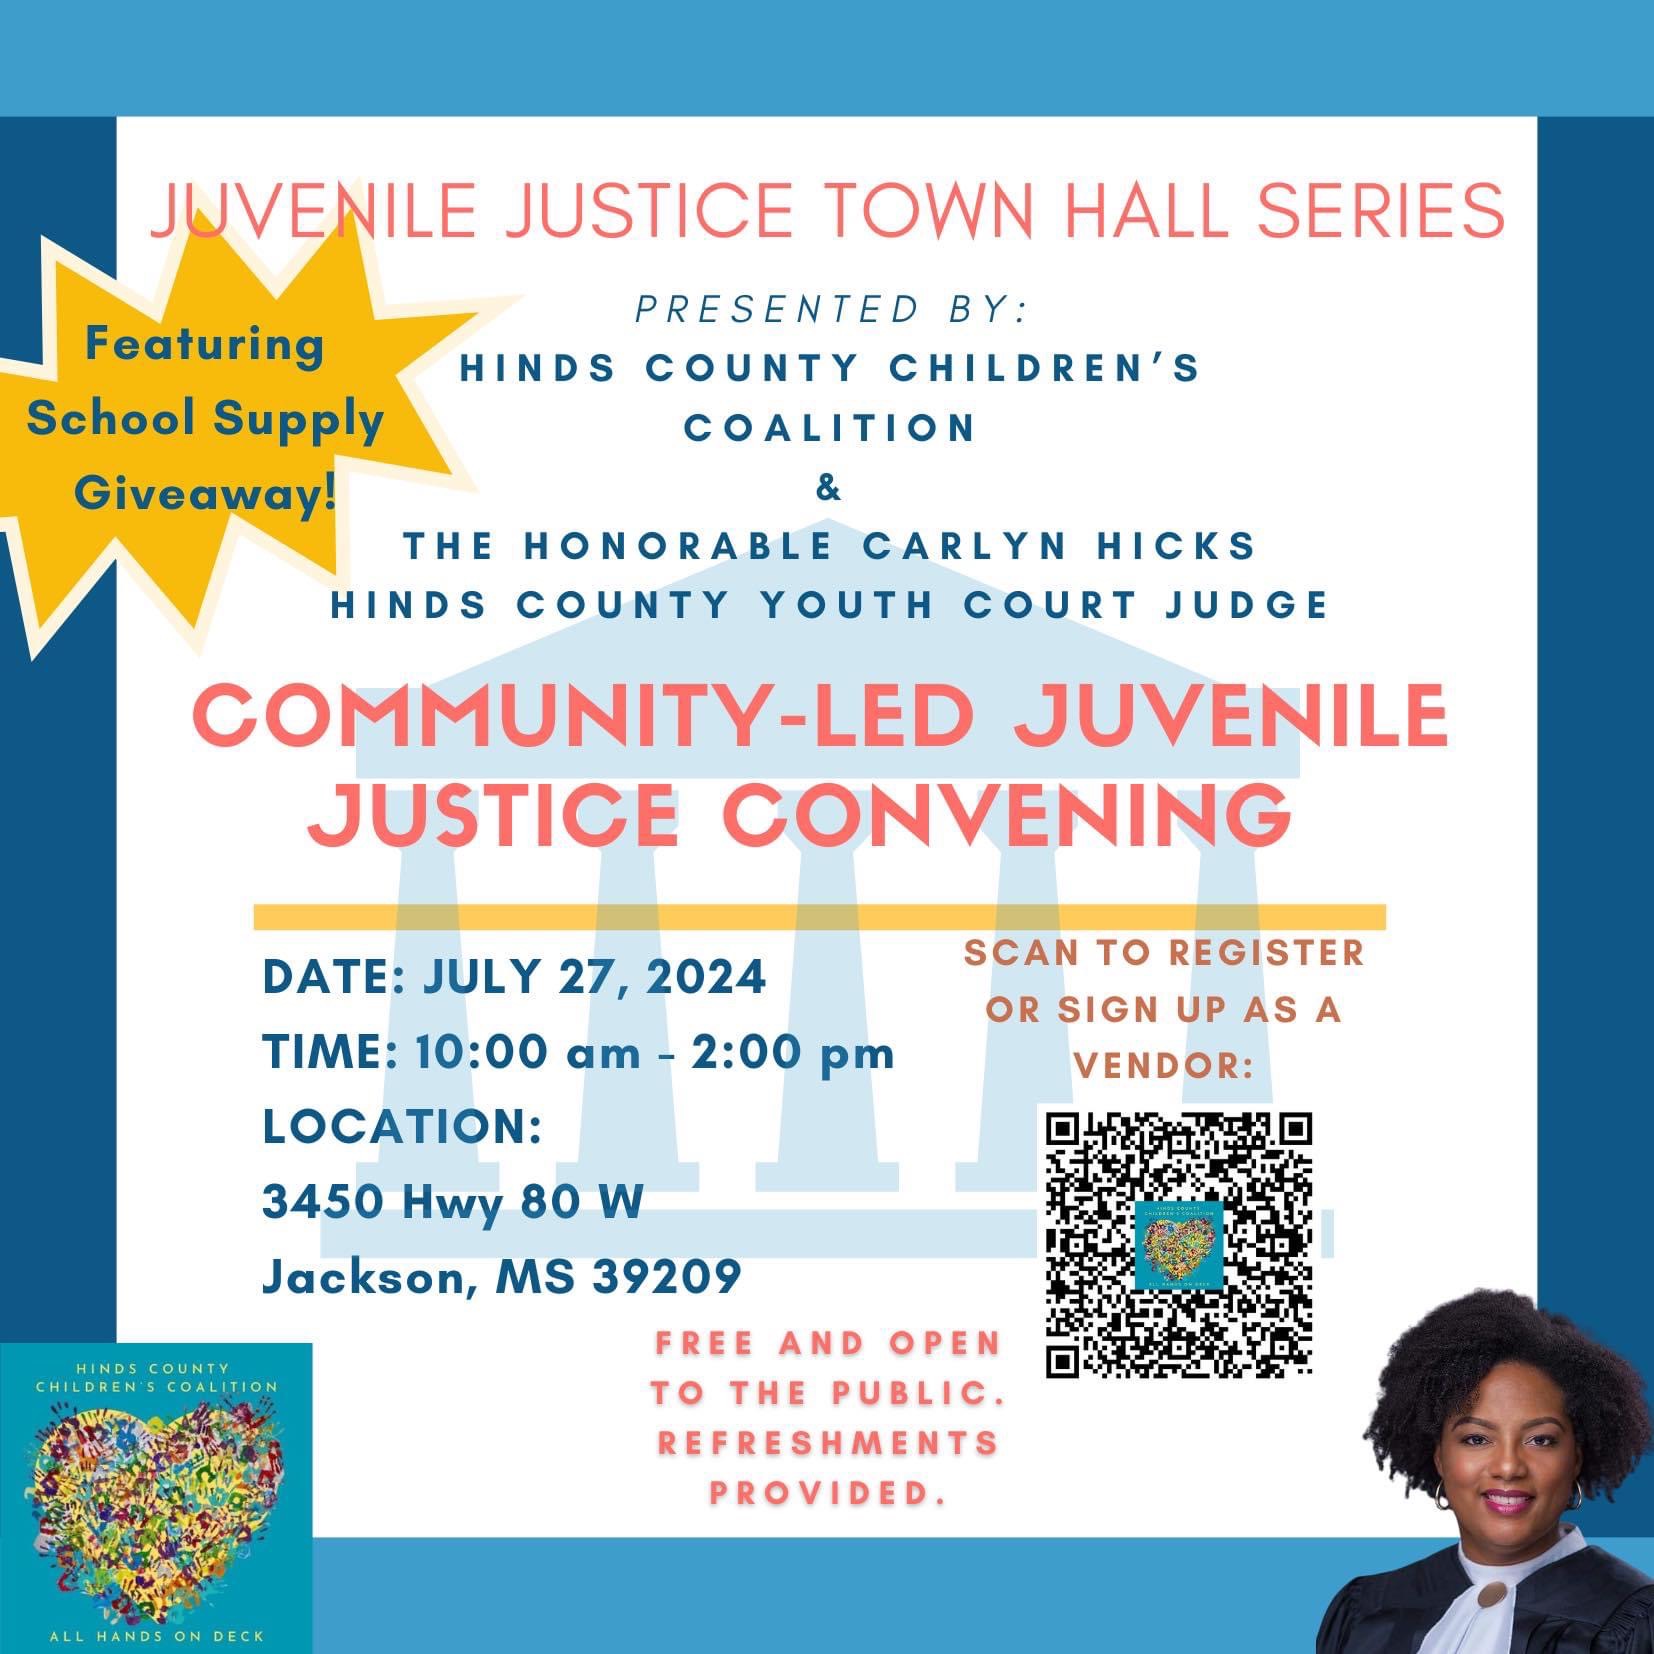 Juvenile Justice Town Hall Series